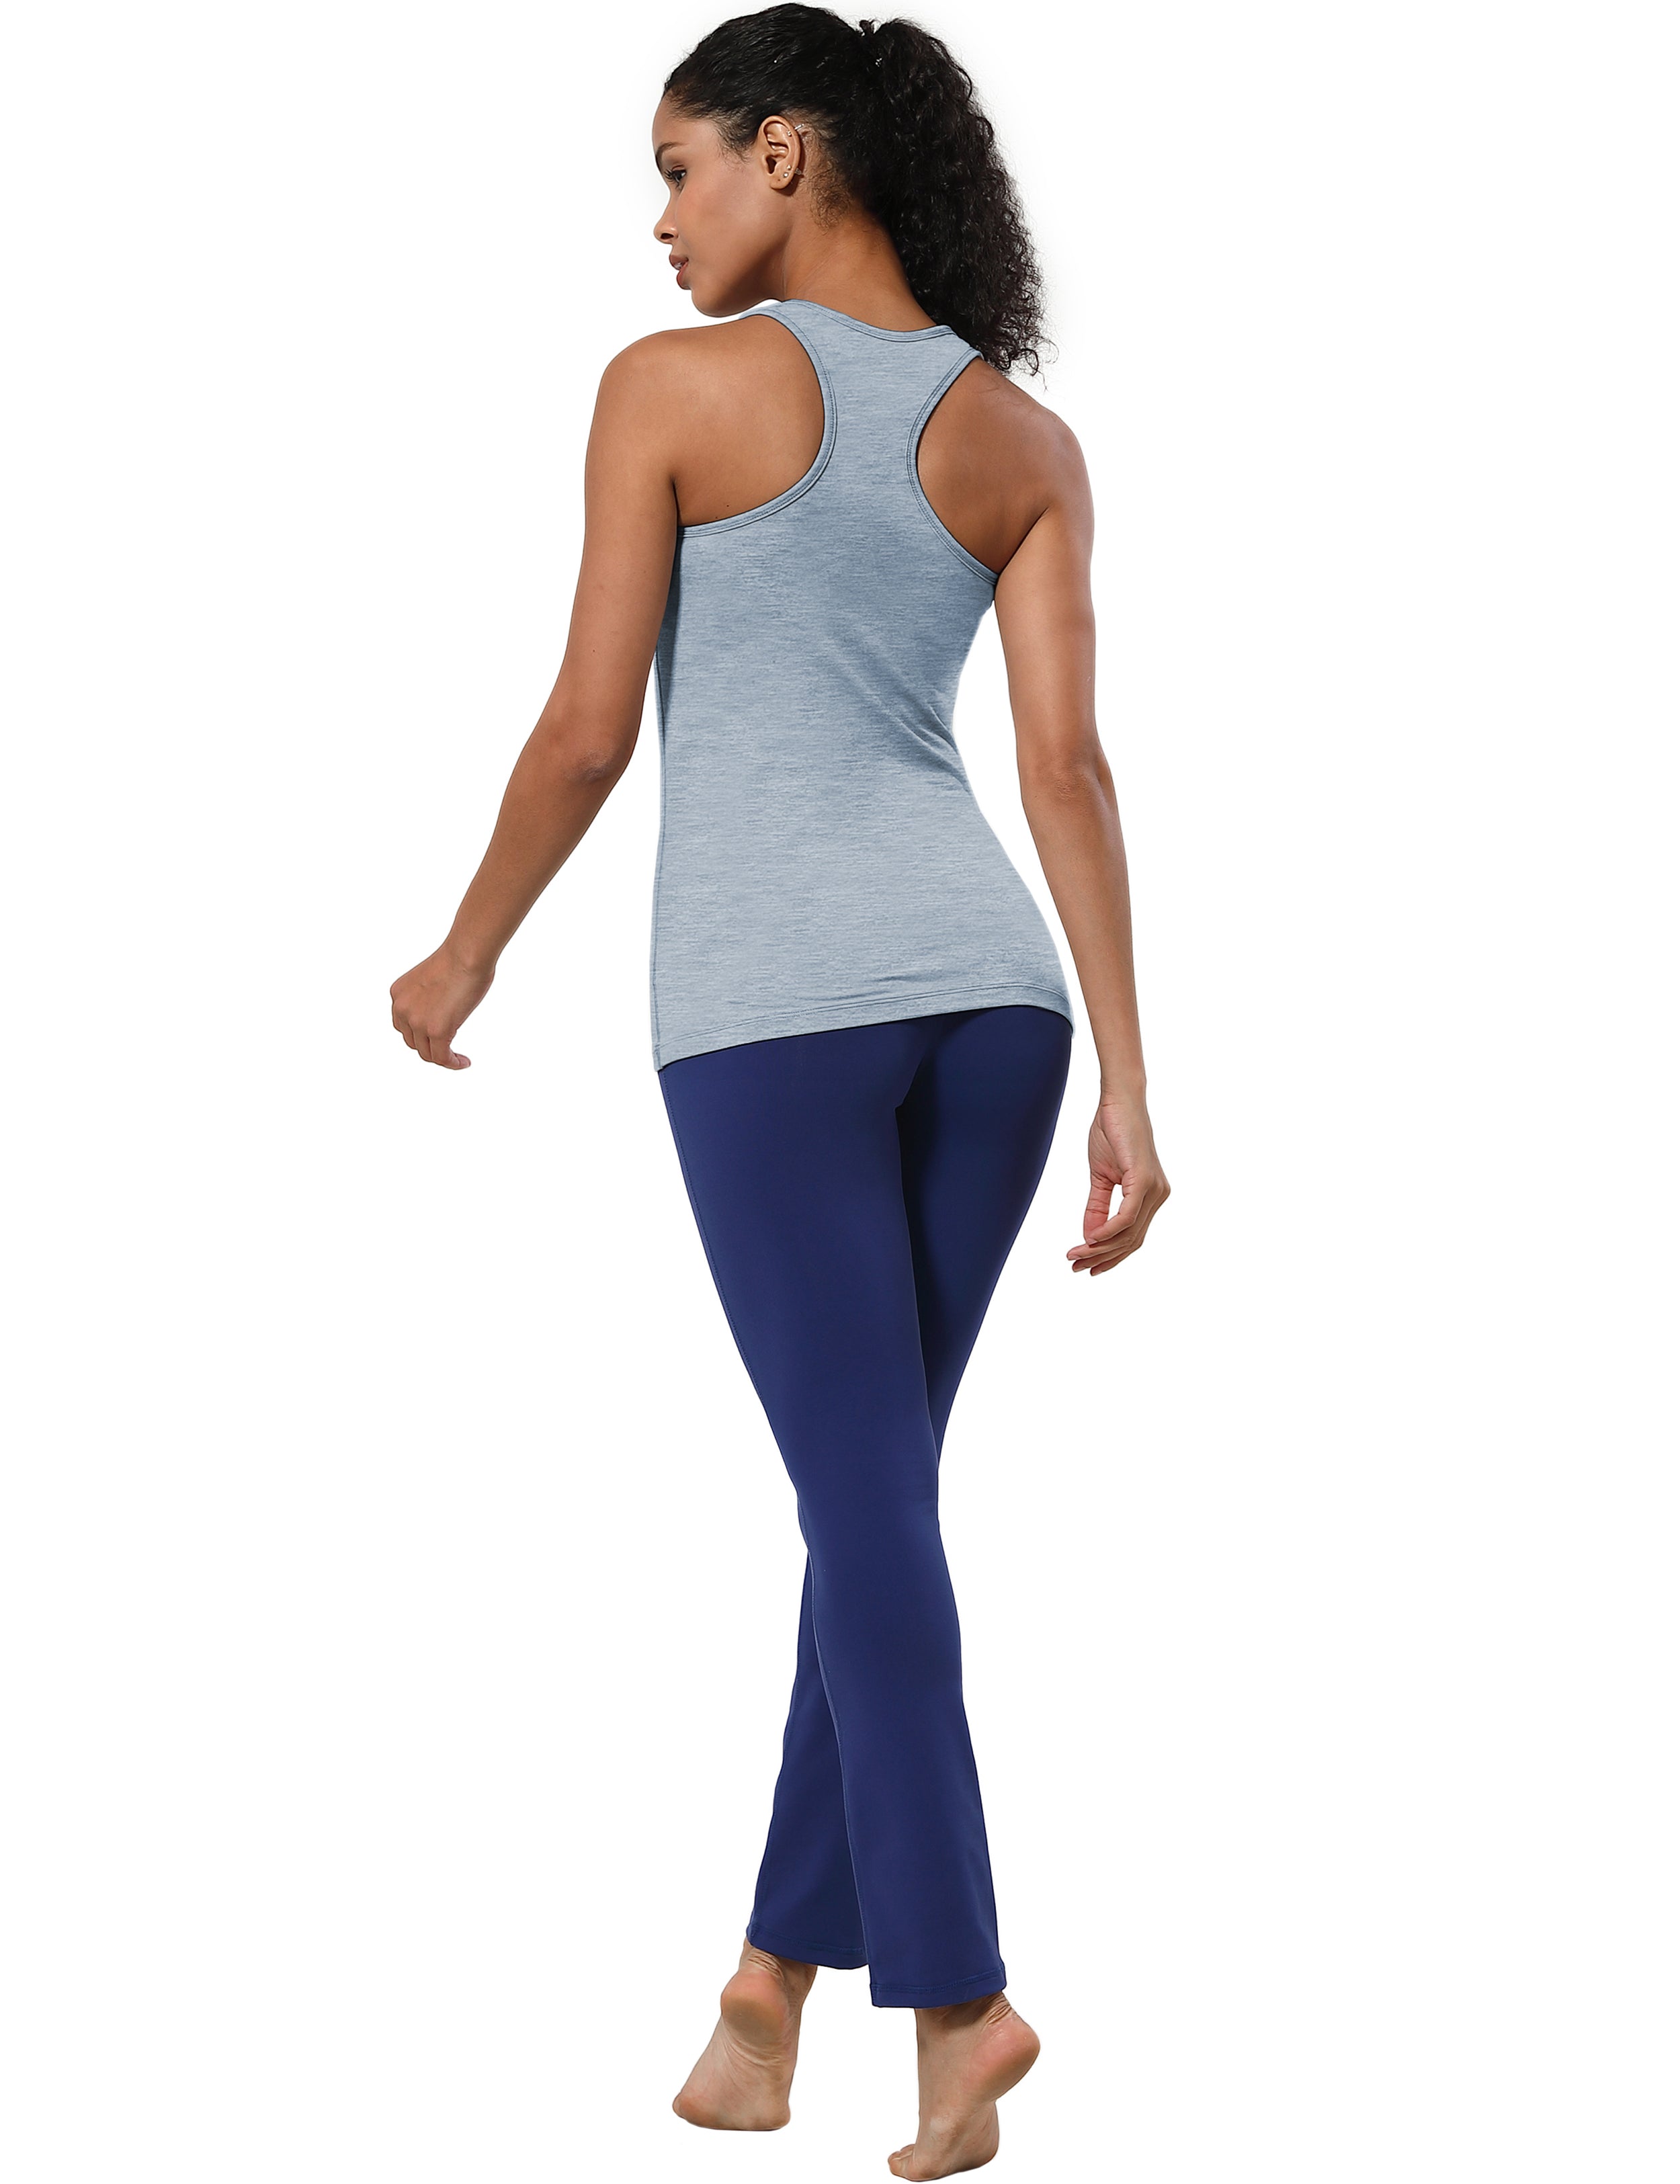 Racerback Athletic Tank Tops heatherblue 92%Nylon/8%Spandex(Cotton Soft) Designed for Yoga Tight Fit So buttery soft, it feels weightless Sweat-wicking Four-way stretch Breathable Contours your body Sits below the waistband for moderate, everyday coverage